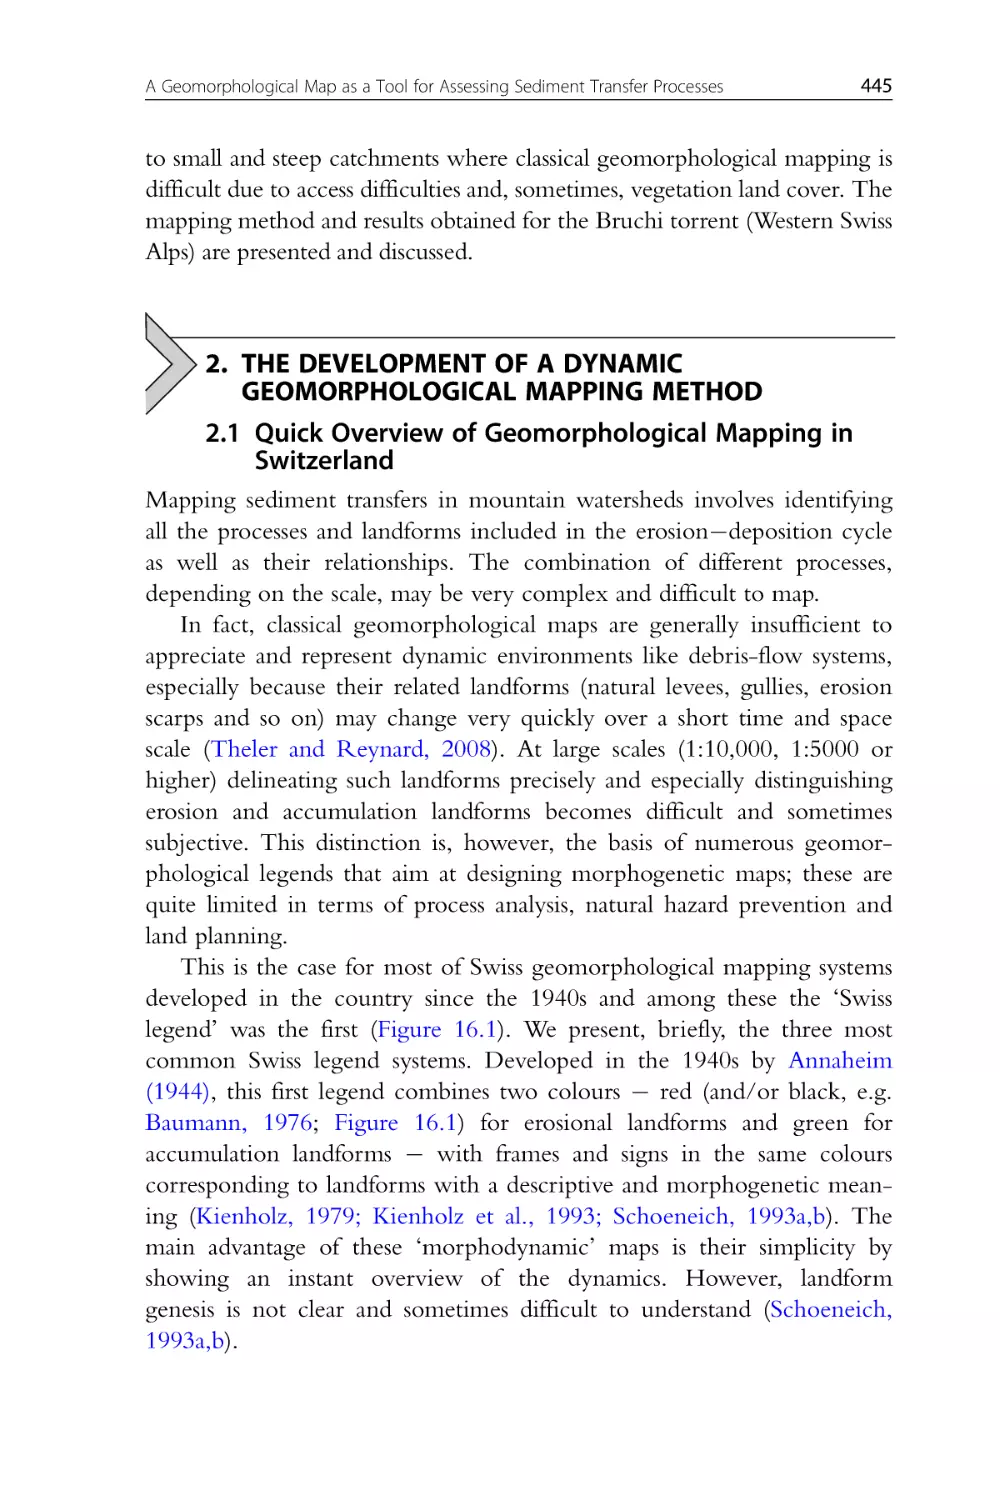 2. The Development of a Dynamic Geomorphological Mapping Method
2.1 Quick Overview of Geomorphological Mapping in Switzerland